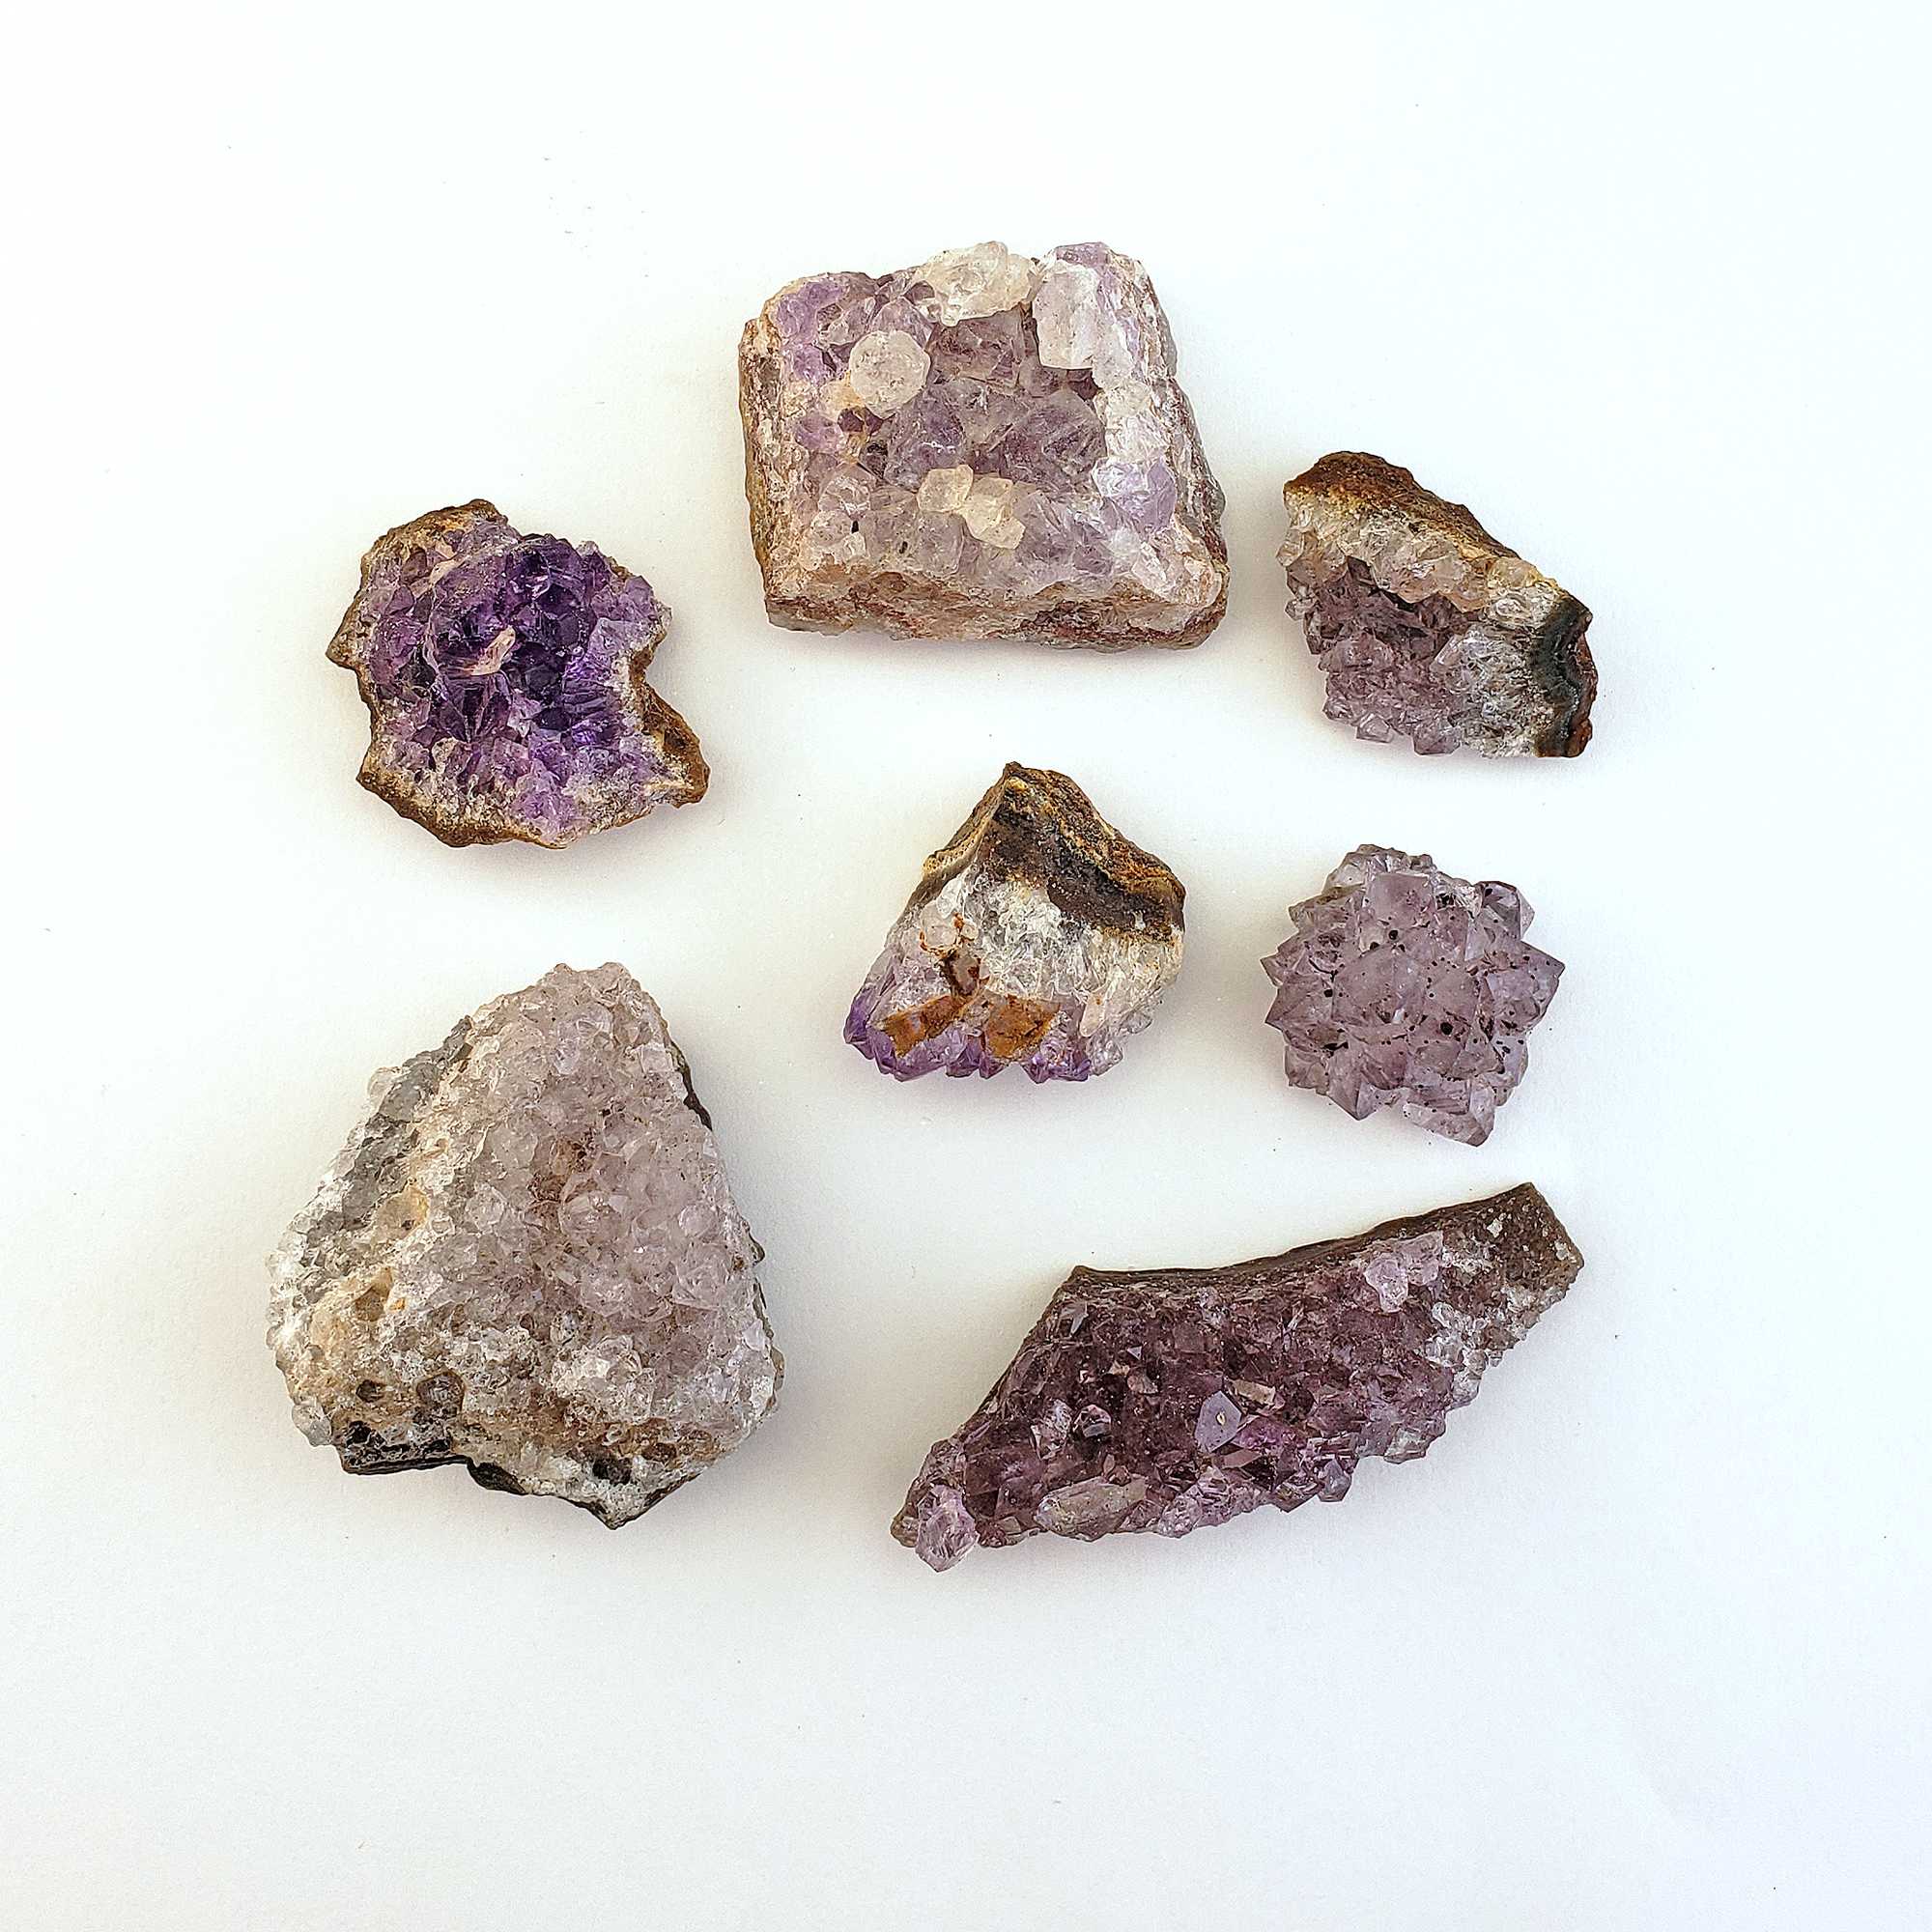 MINI Druzy Raw Amethyst Crystal Clusters - 3 Ounce Bag - White background